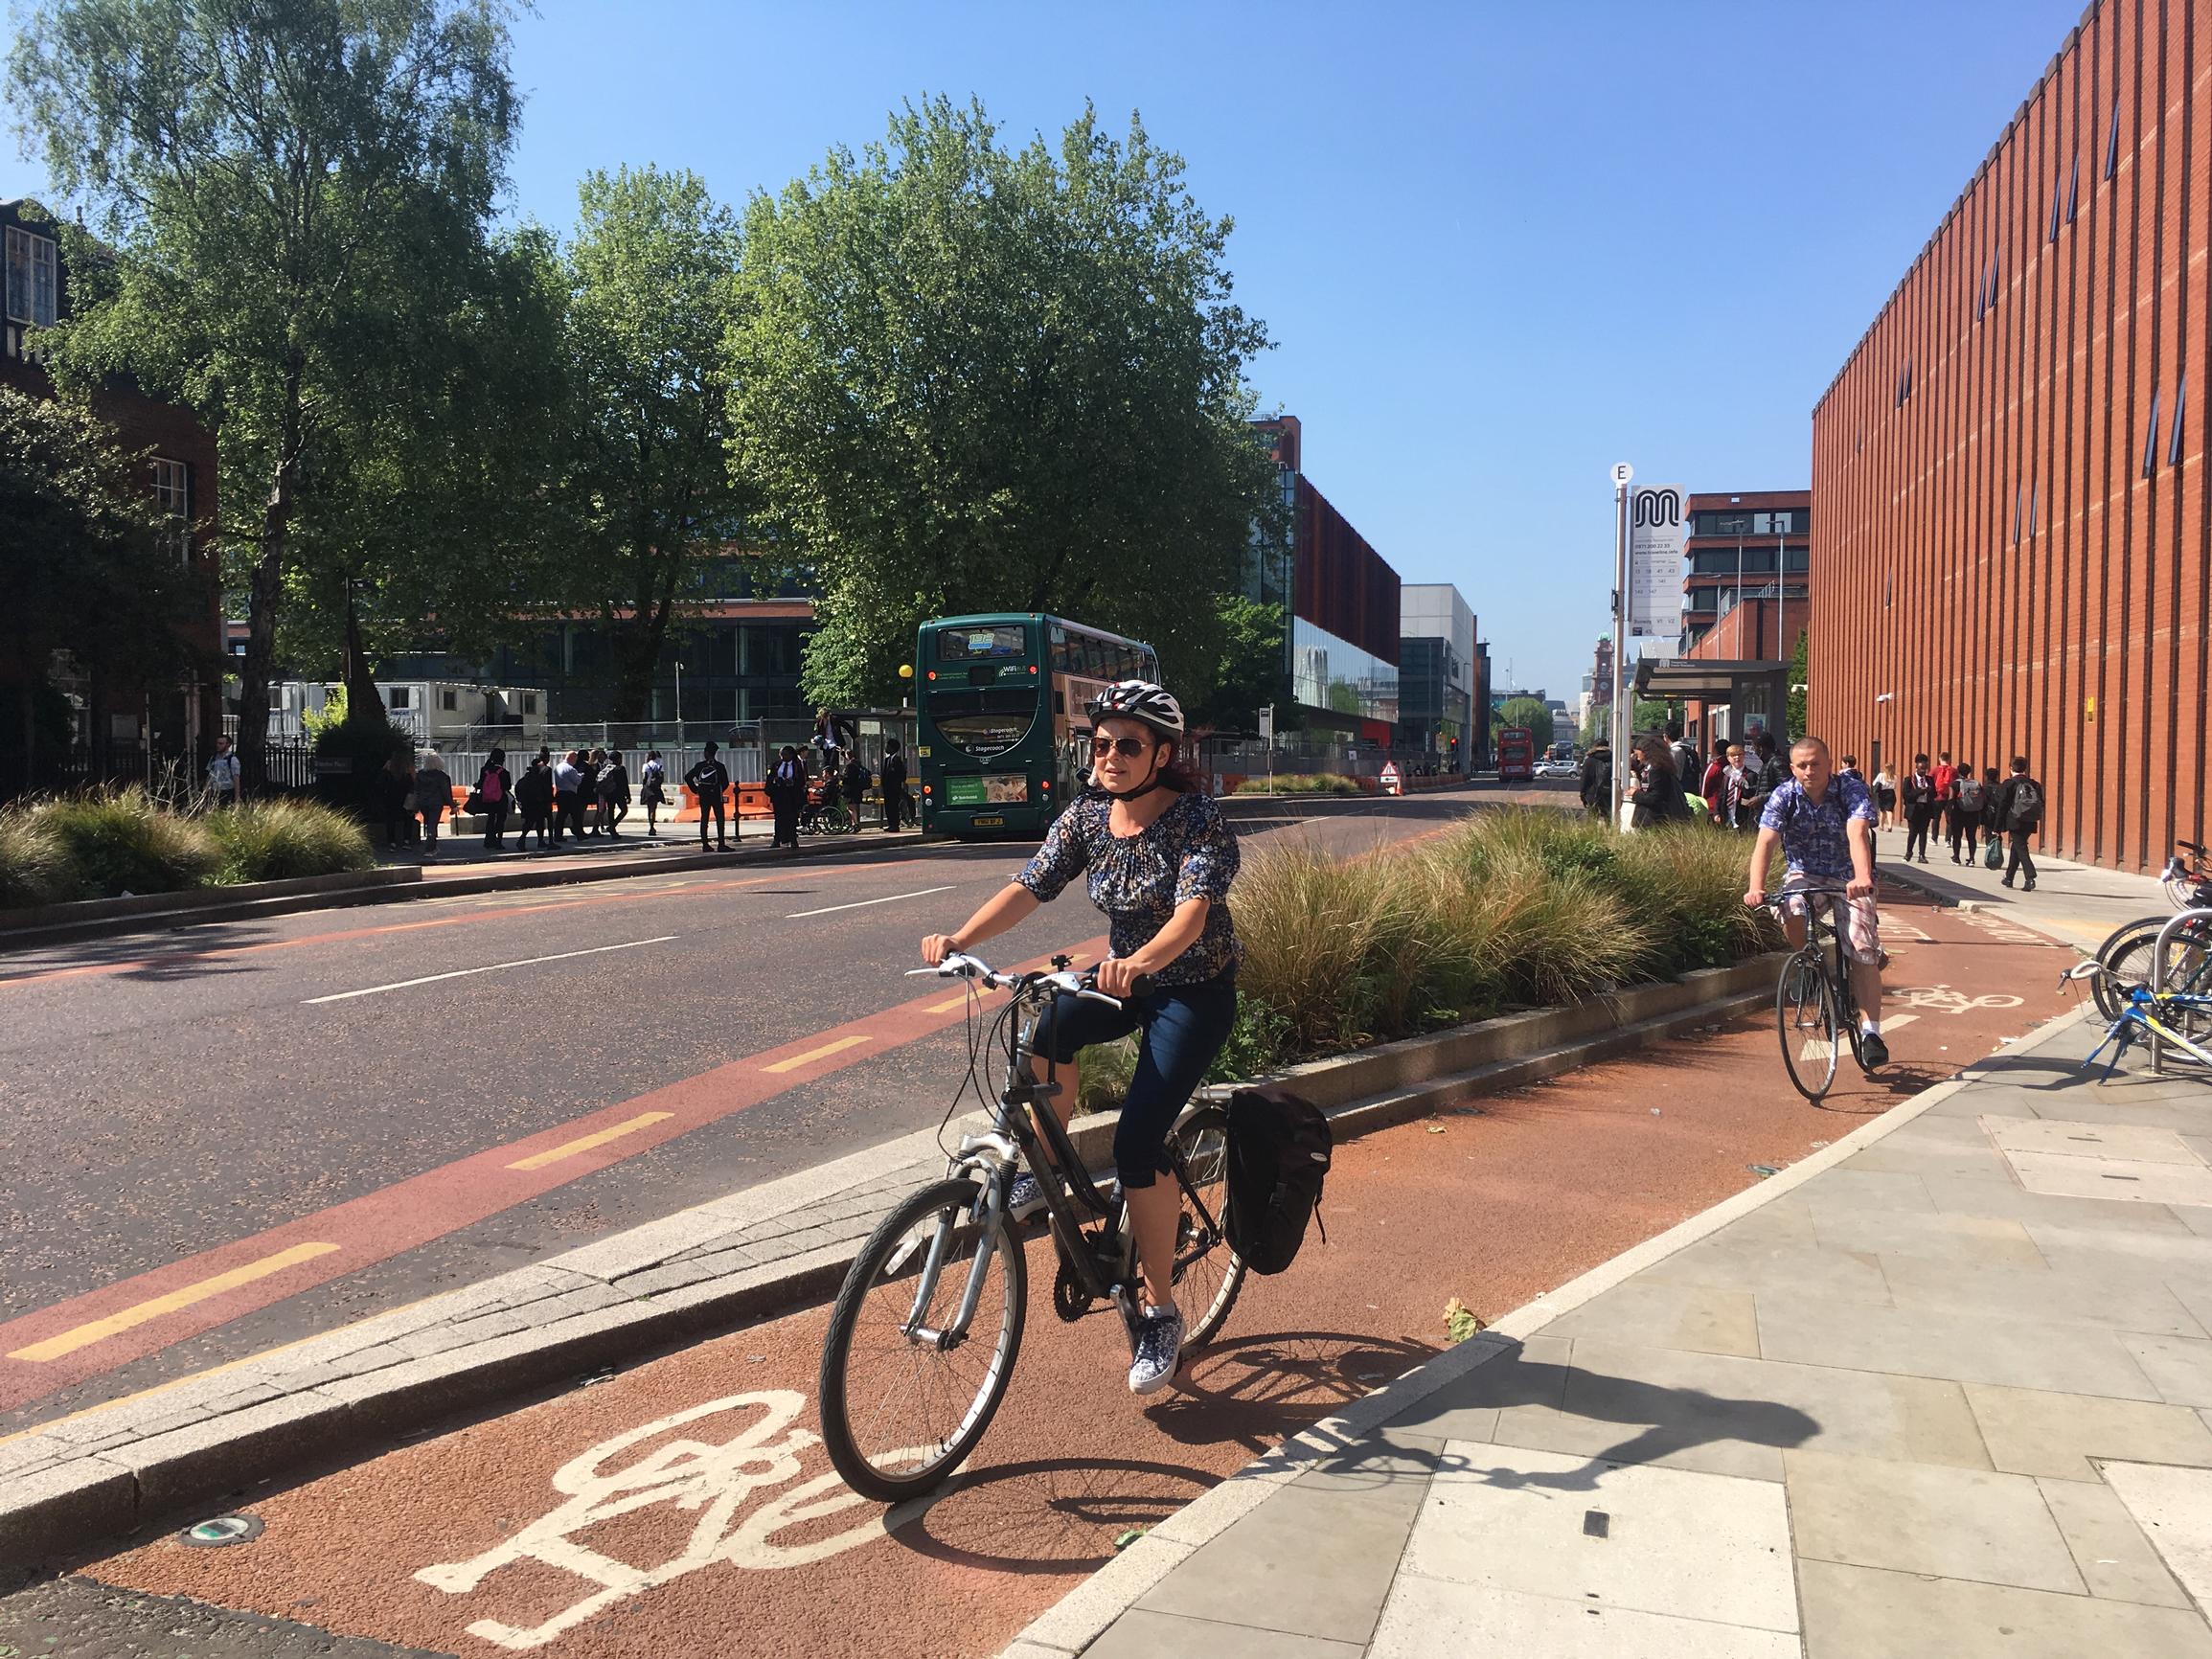 A new cycle lane in Manchester